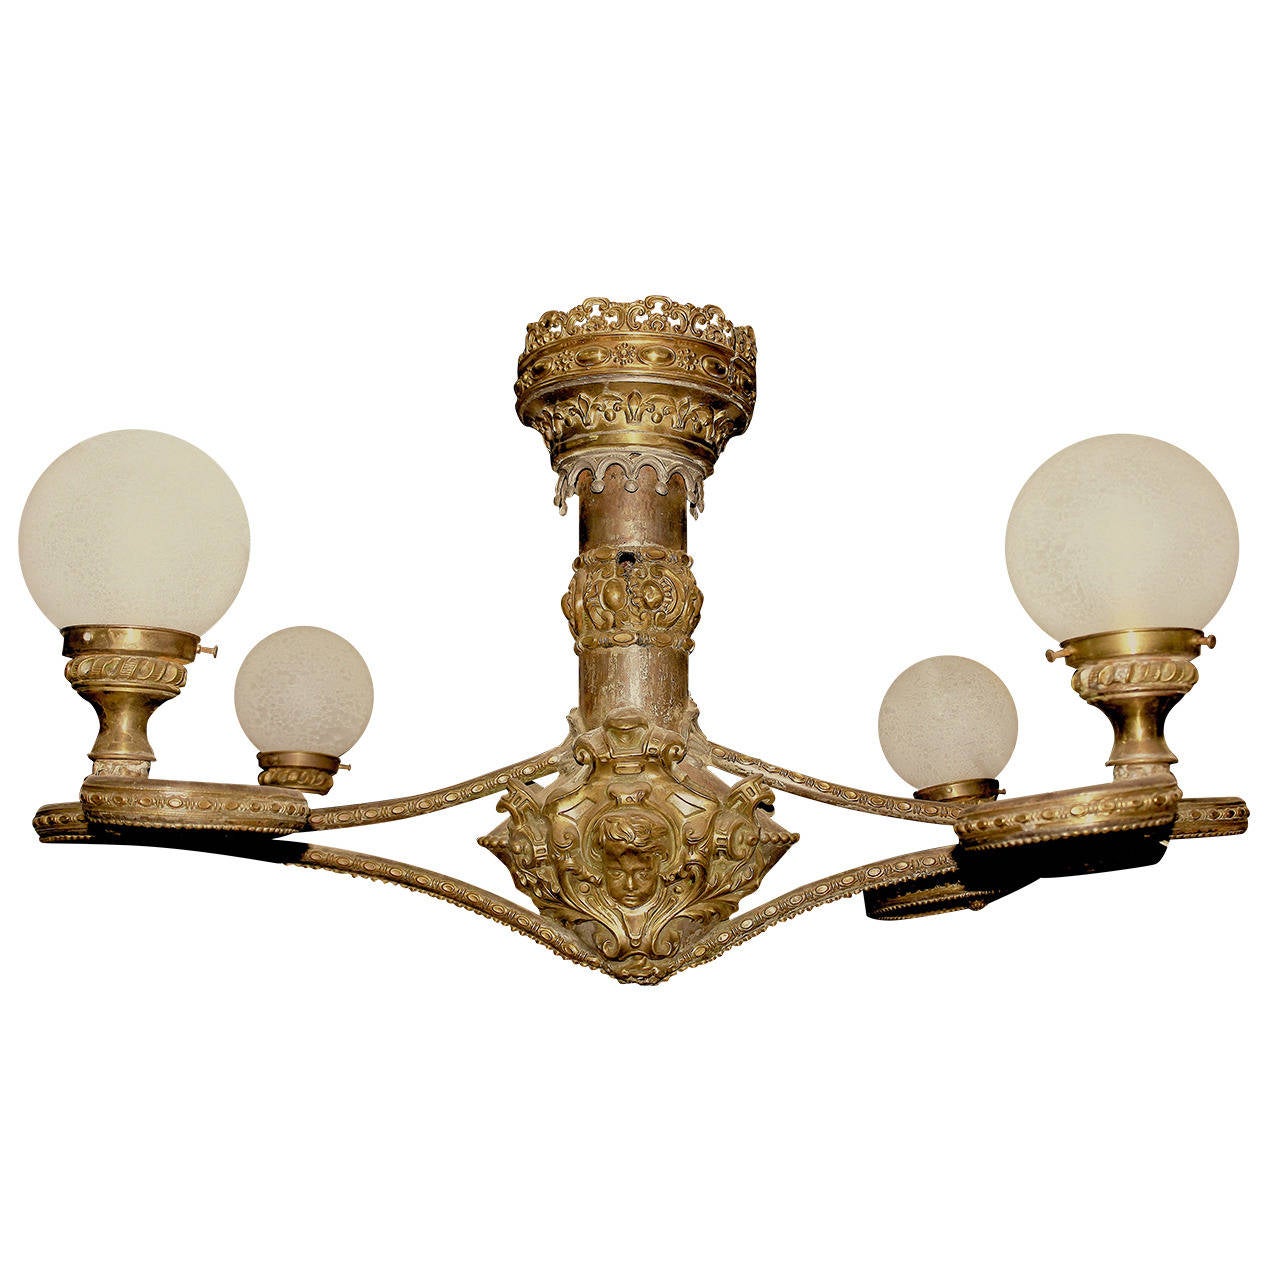 A most incredible, rare, and unique highly decorative monumental beaux arts belle époque chandelier!!!- 4 volute curvilinear repose arms, milk glass globes, brass and zinc stem, repousse faces and elaborate trim- great aged patina of brass & zinc-